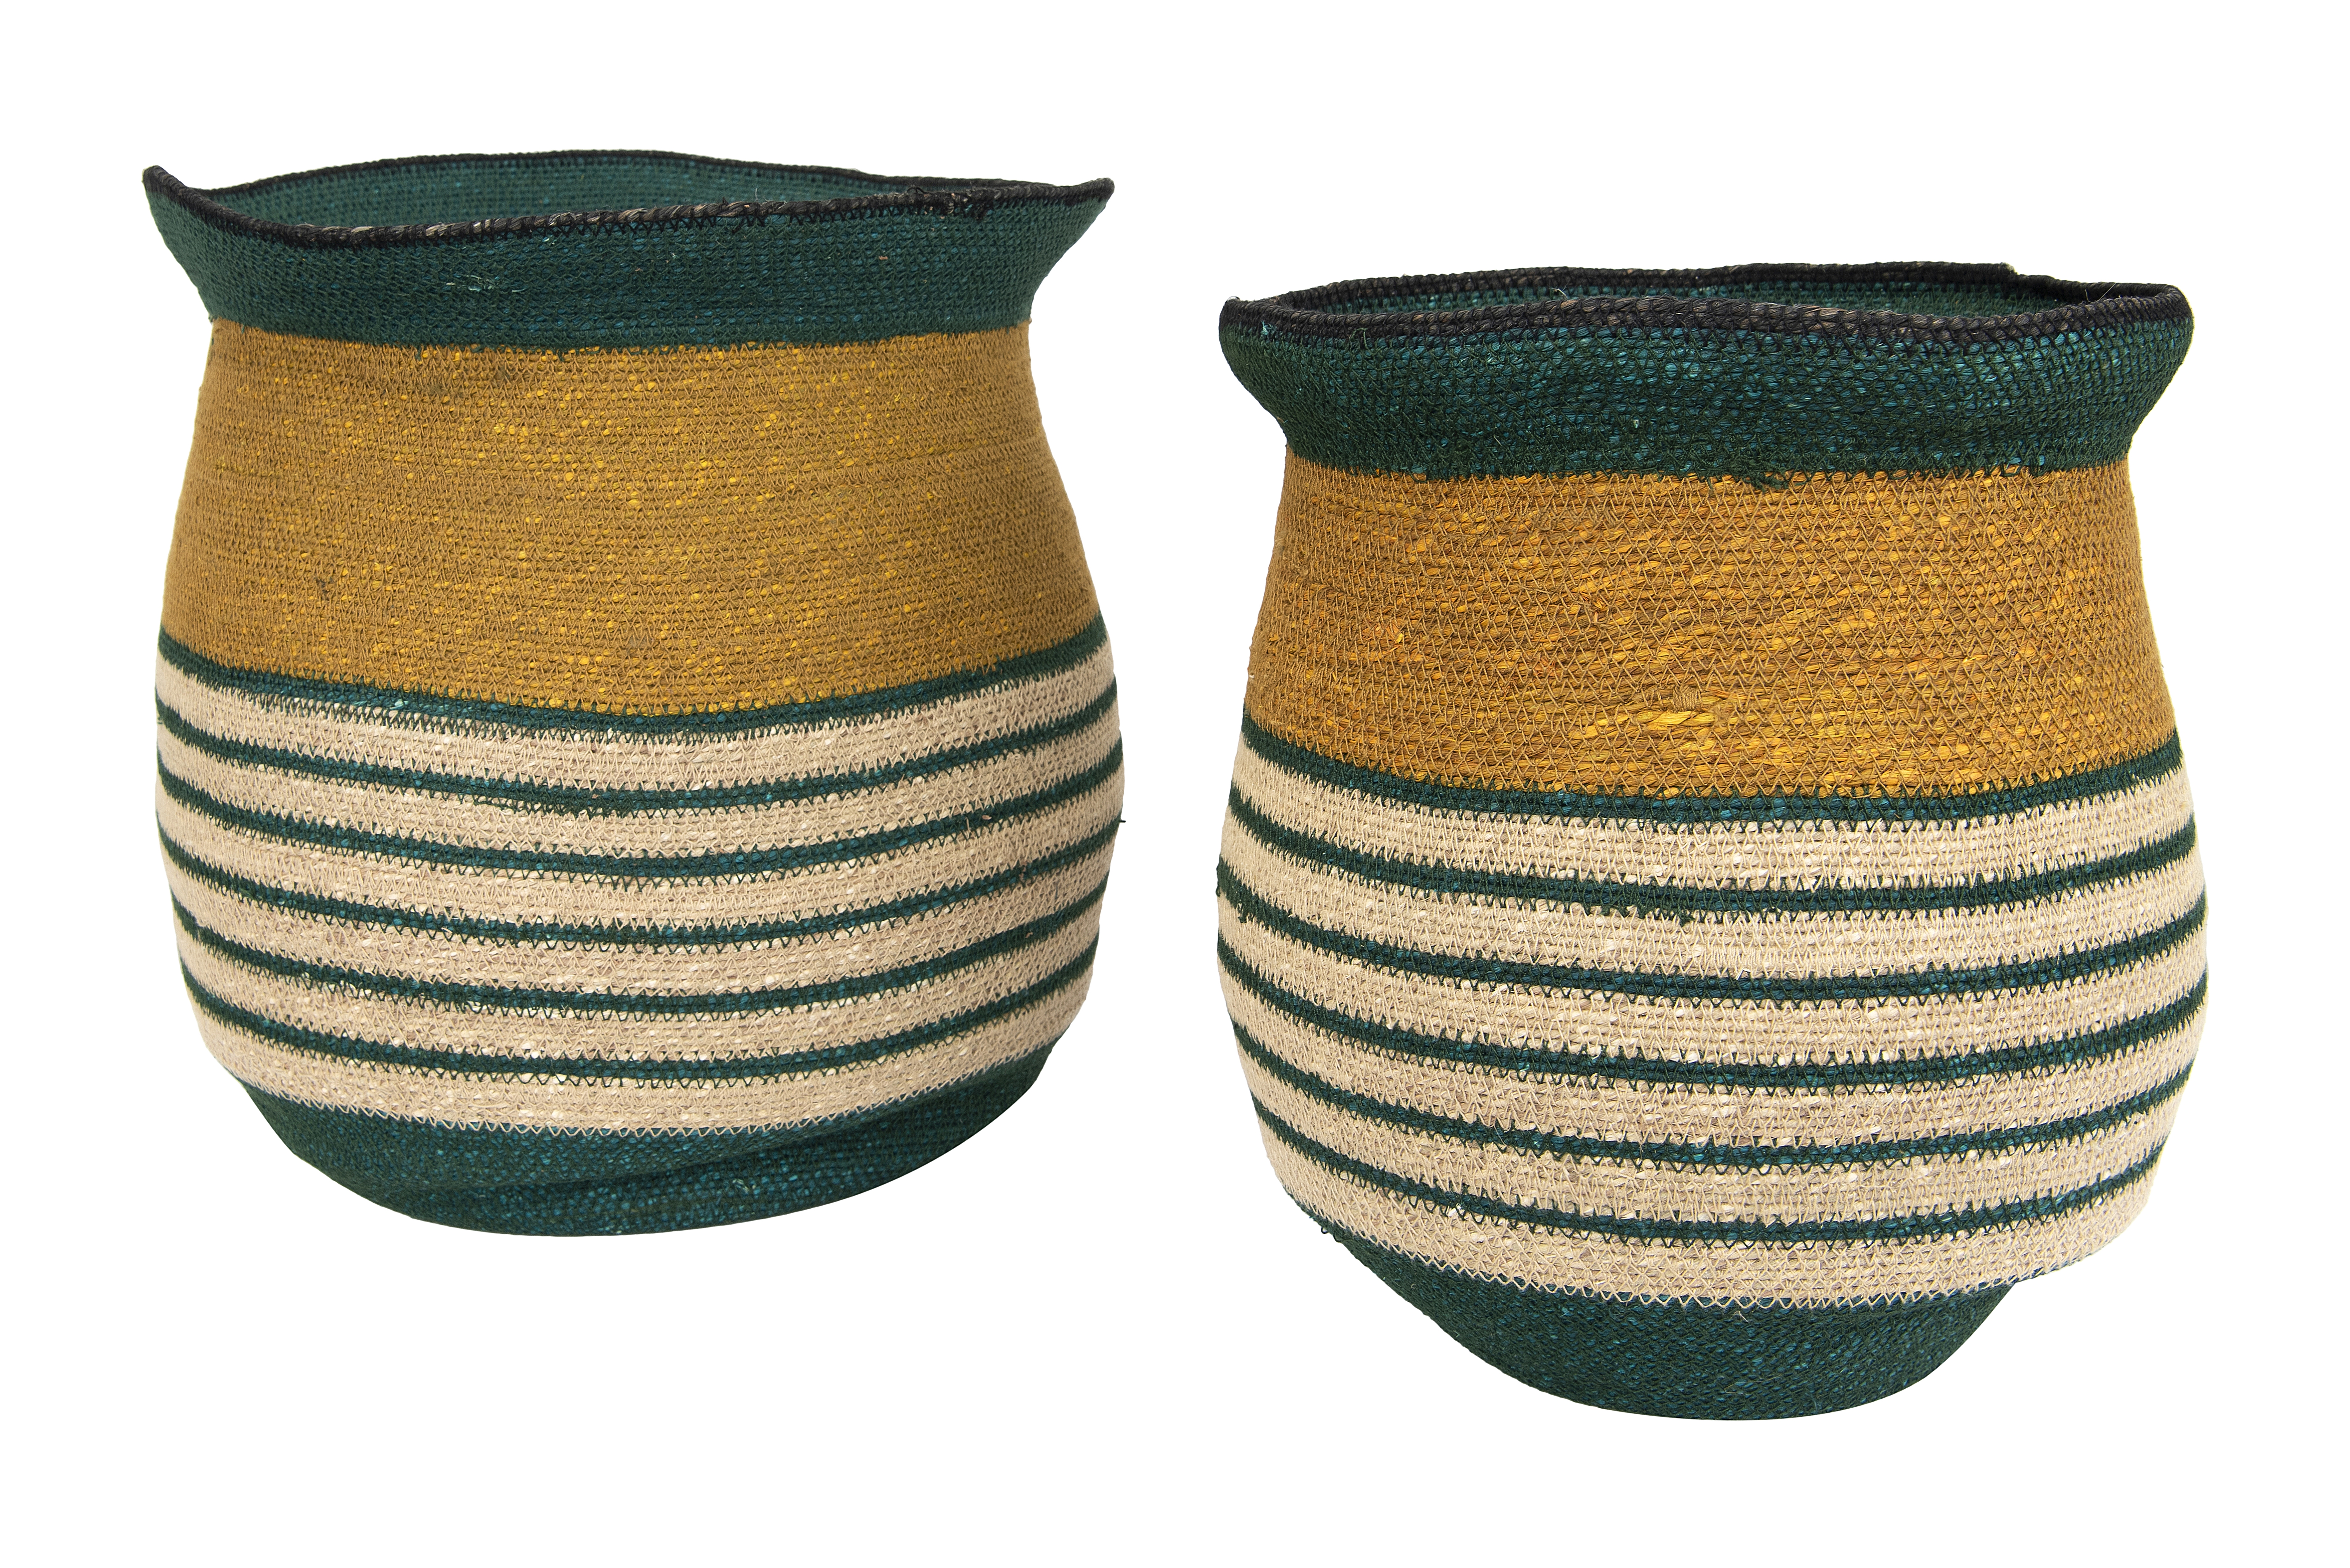 13.25" & 14.25" Handwoven Natural Seagrass Striped Baskets (Set of 2 Sizes) - Nomad Home